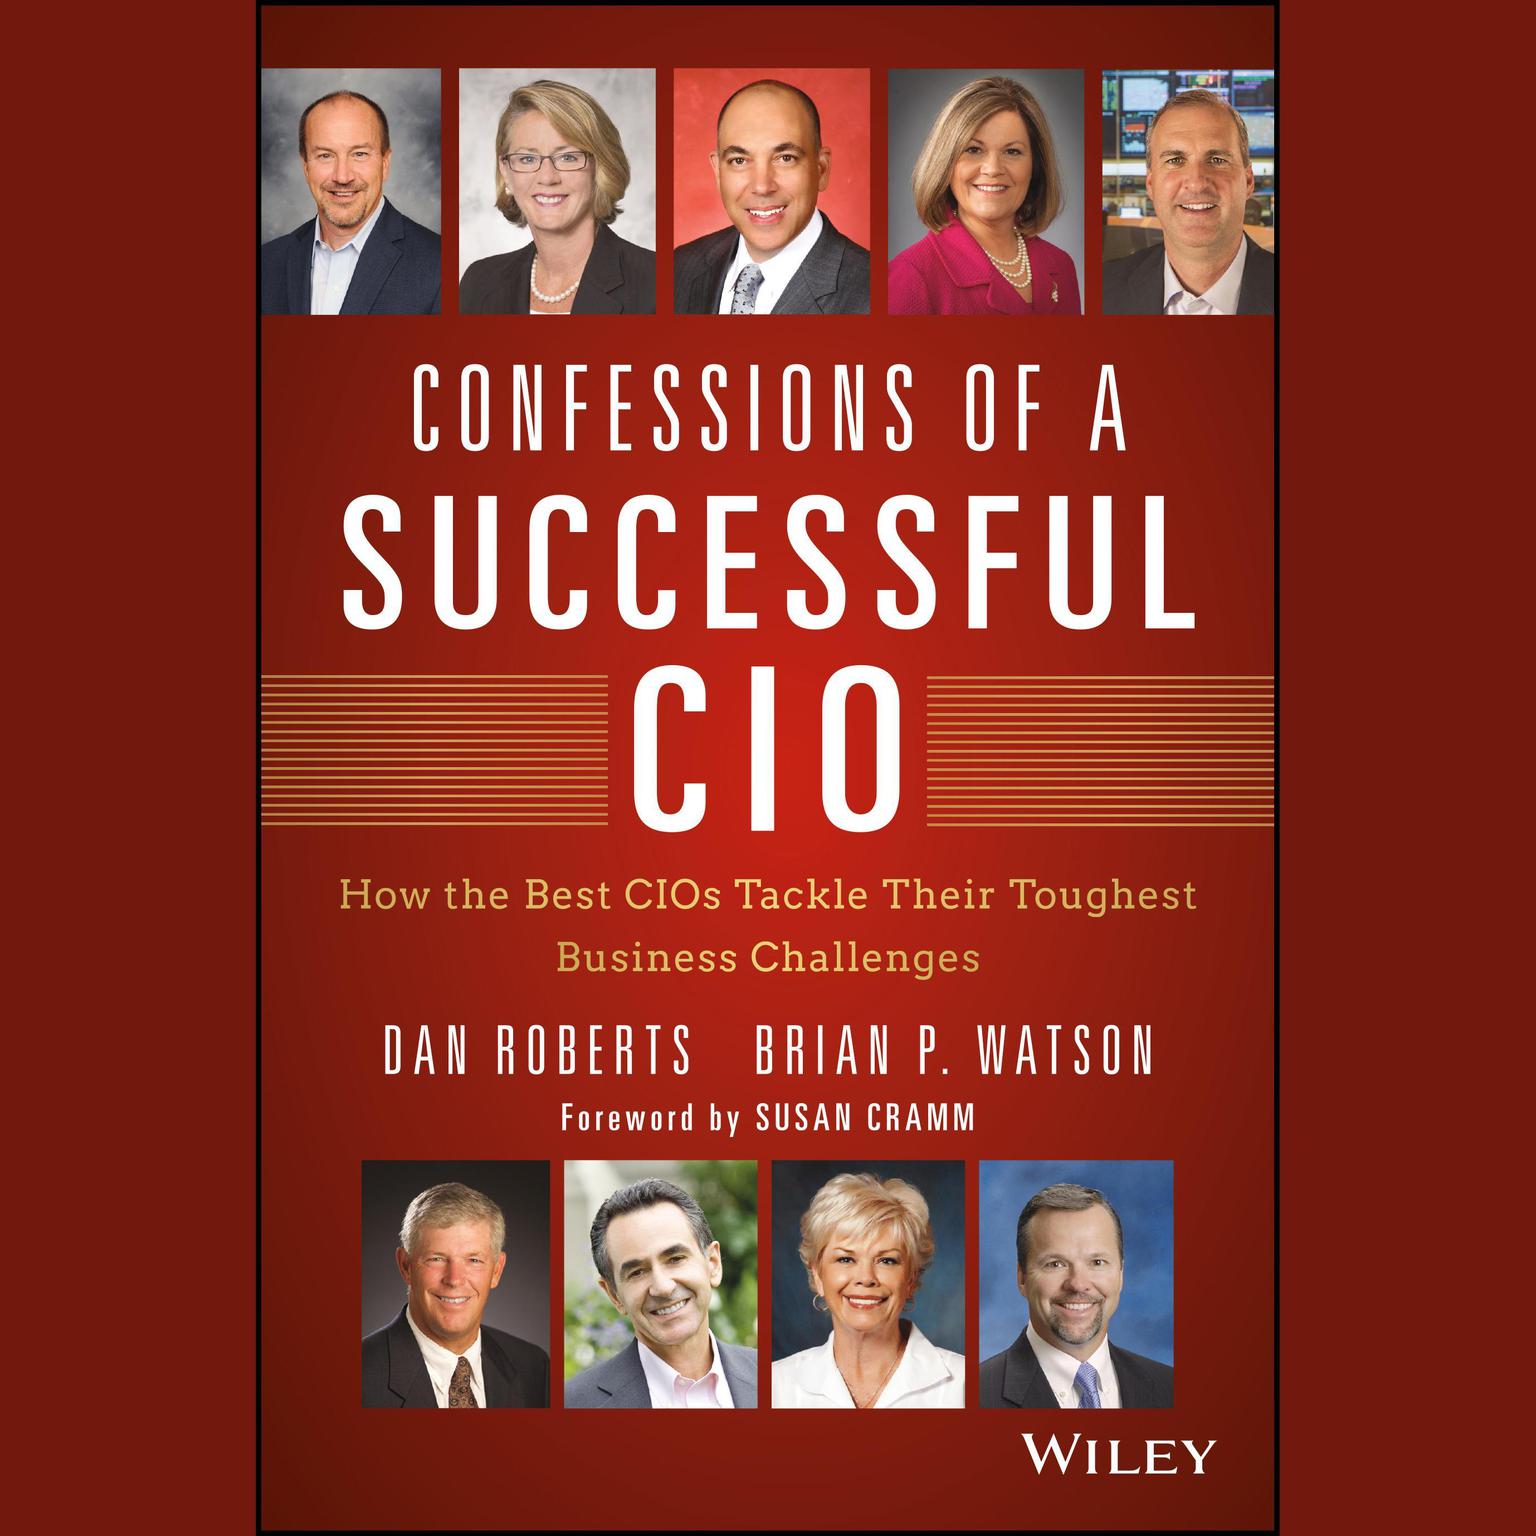 Confessions of a Successful CIO: How the Best CIOs Tackle Their Toughest Business Challenges Audiobook, by Dan Roberts